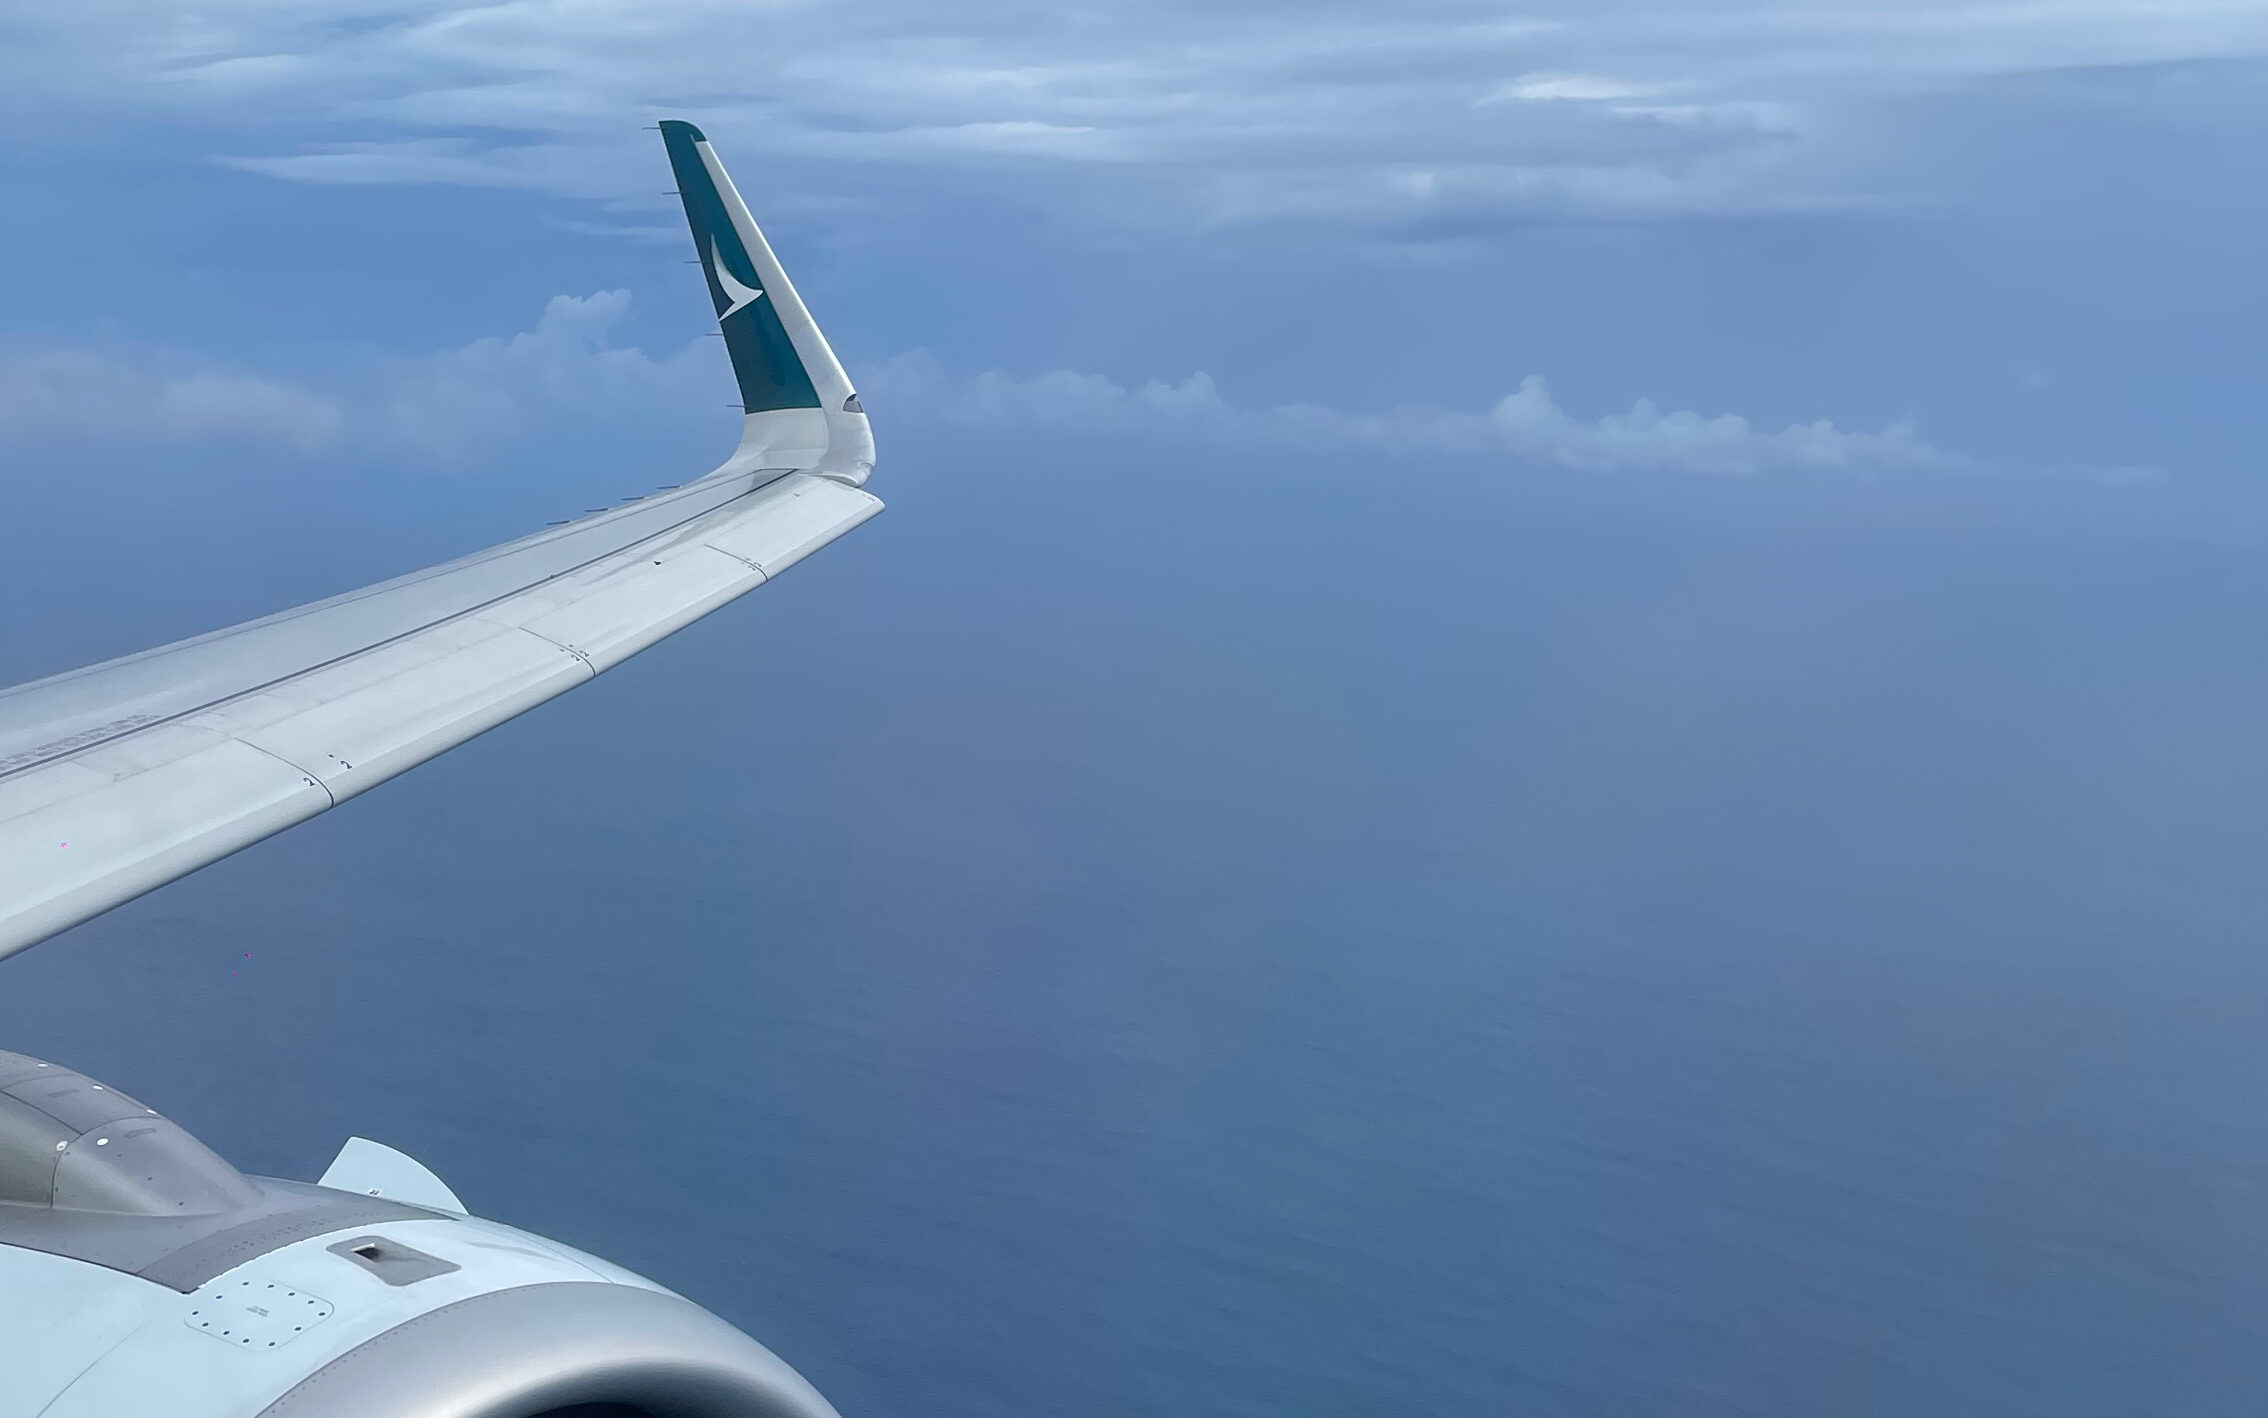 Cathay Pacific Wing Tip on an A321neo aircraft.